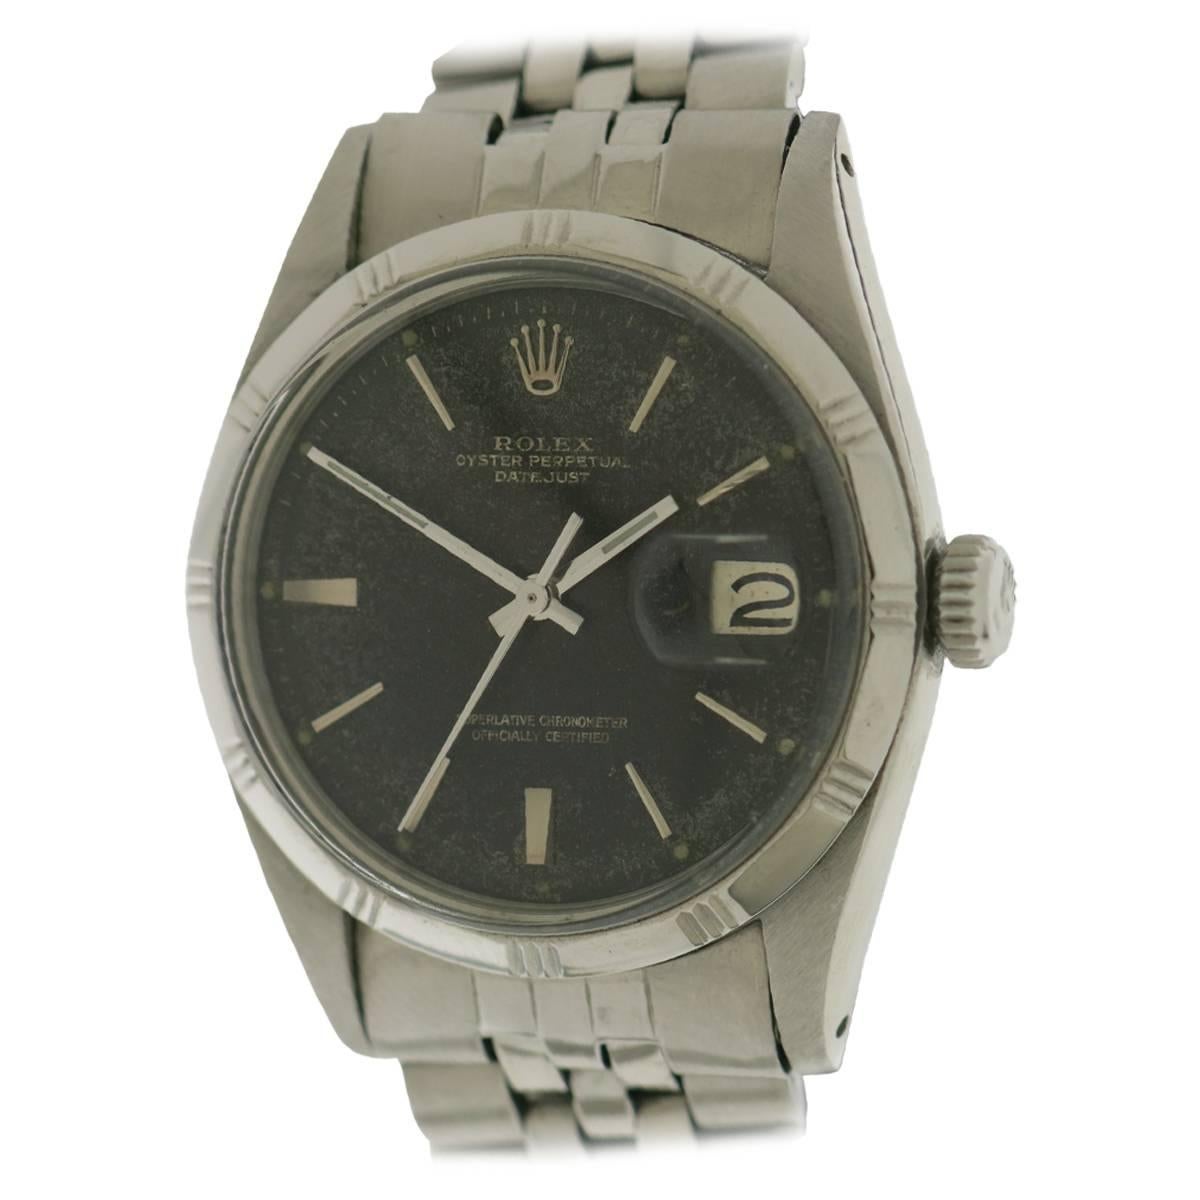 Rolex Stainless Steel Oyster Perpetual Datejust Wristwatch Ref 1603 For Sale